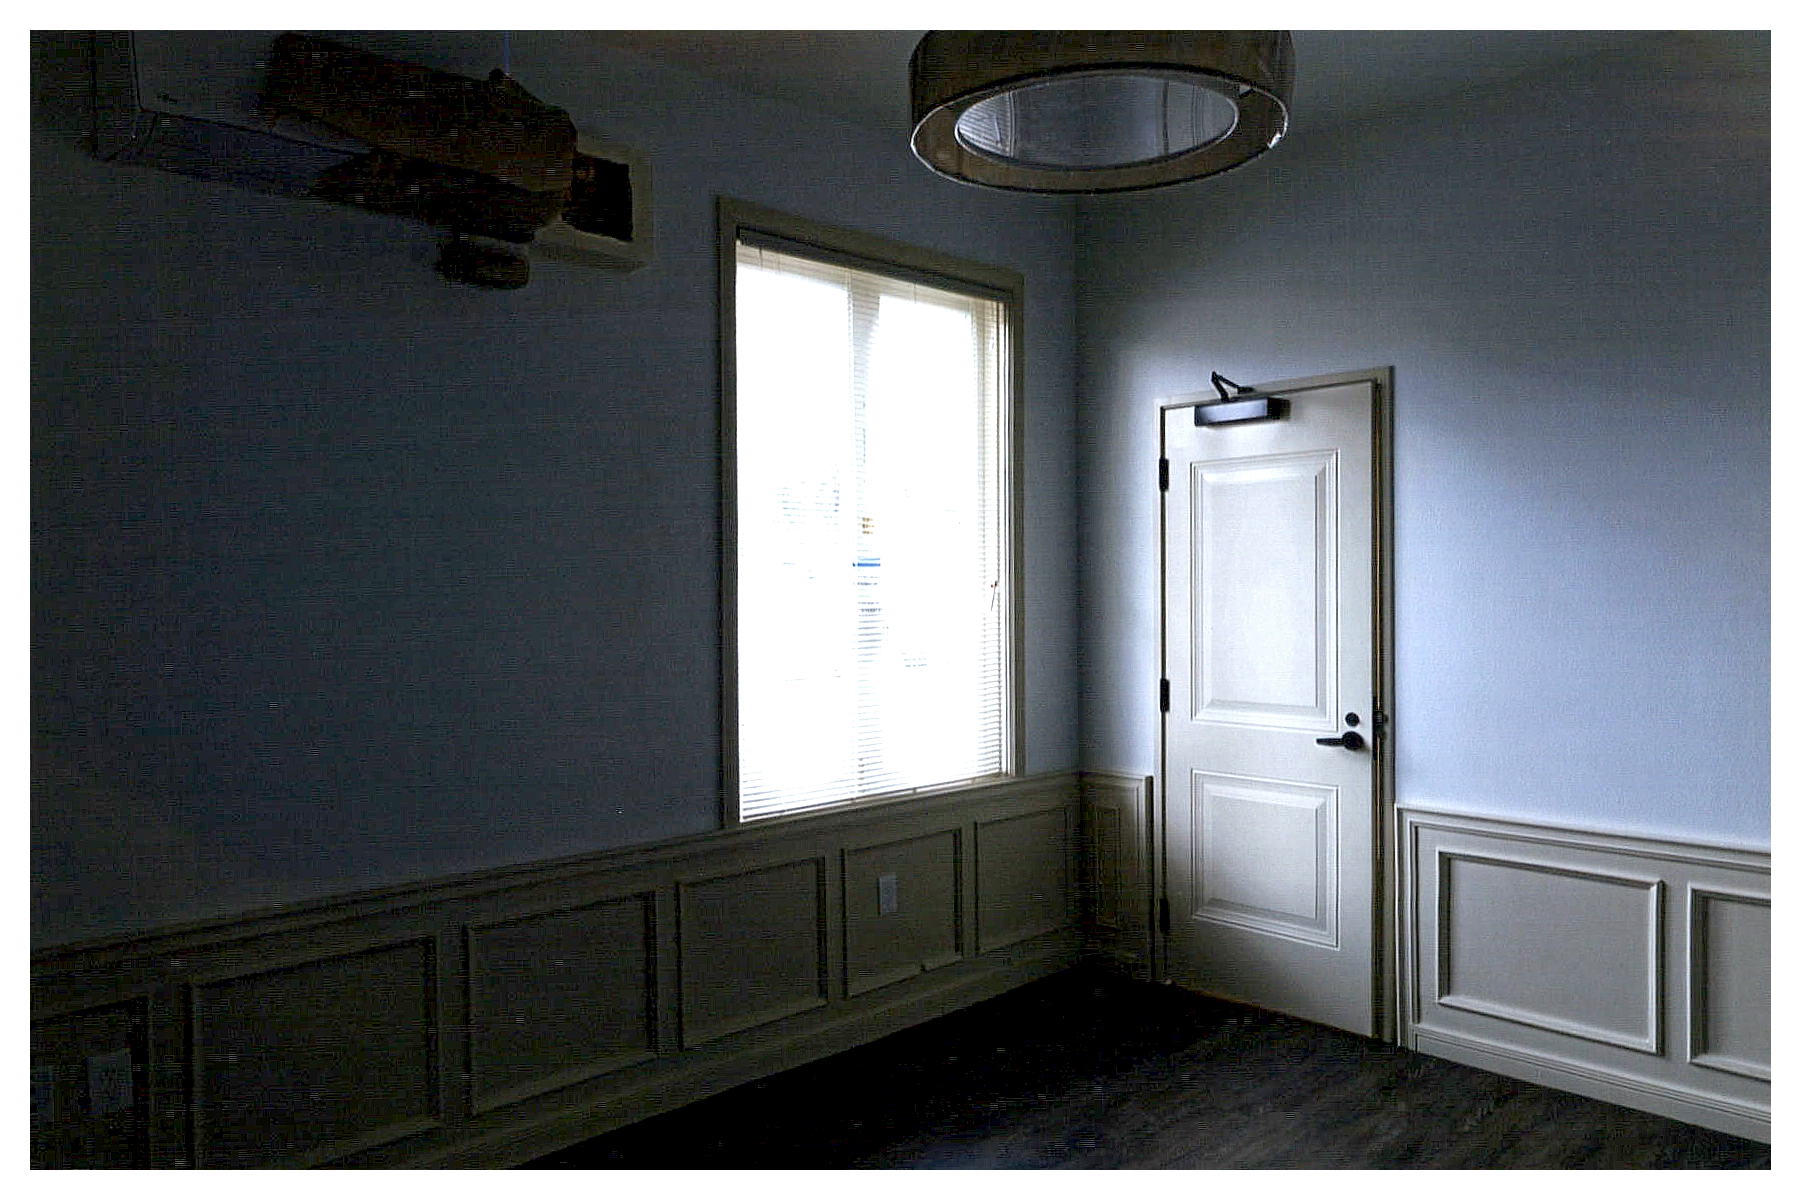 After: corner view of renovated room with a rehabilitated window, entrance door with closer, restored paneled wainscoting and new pendant light fixture.